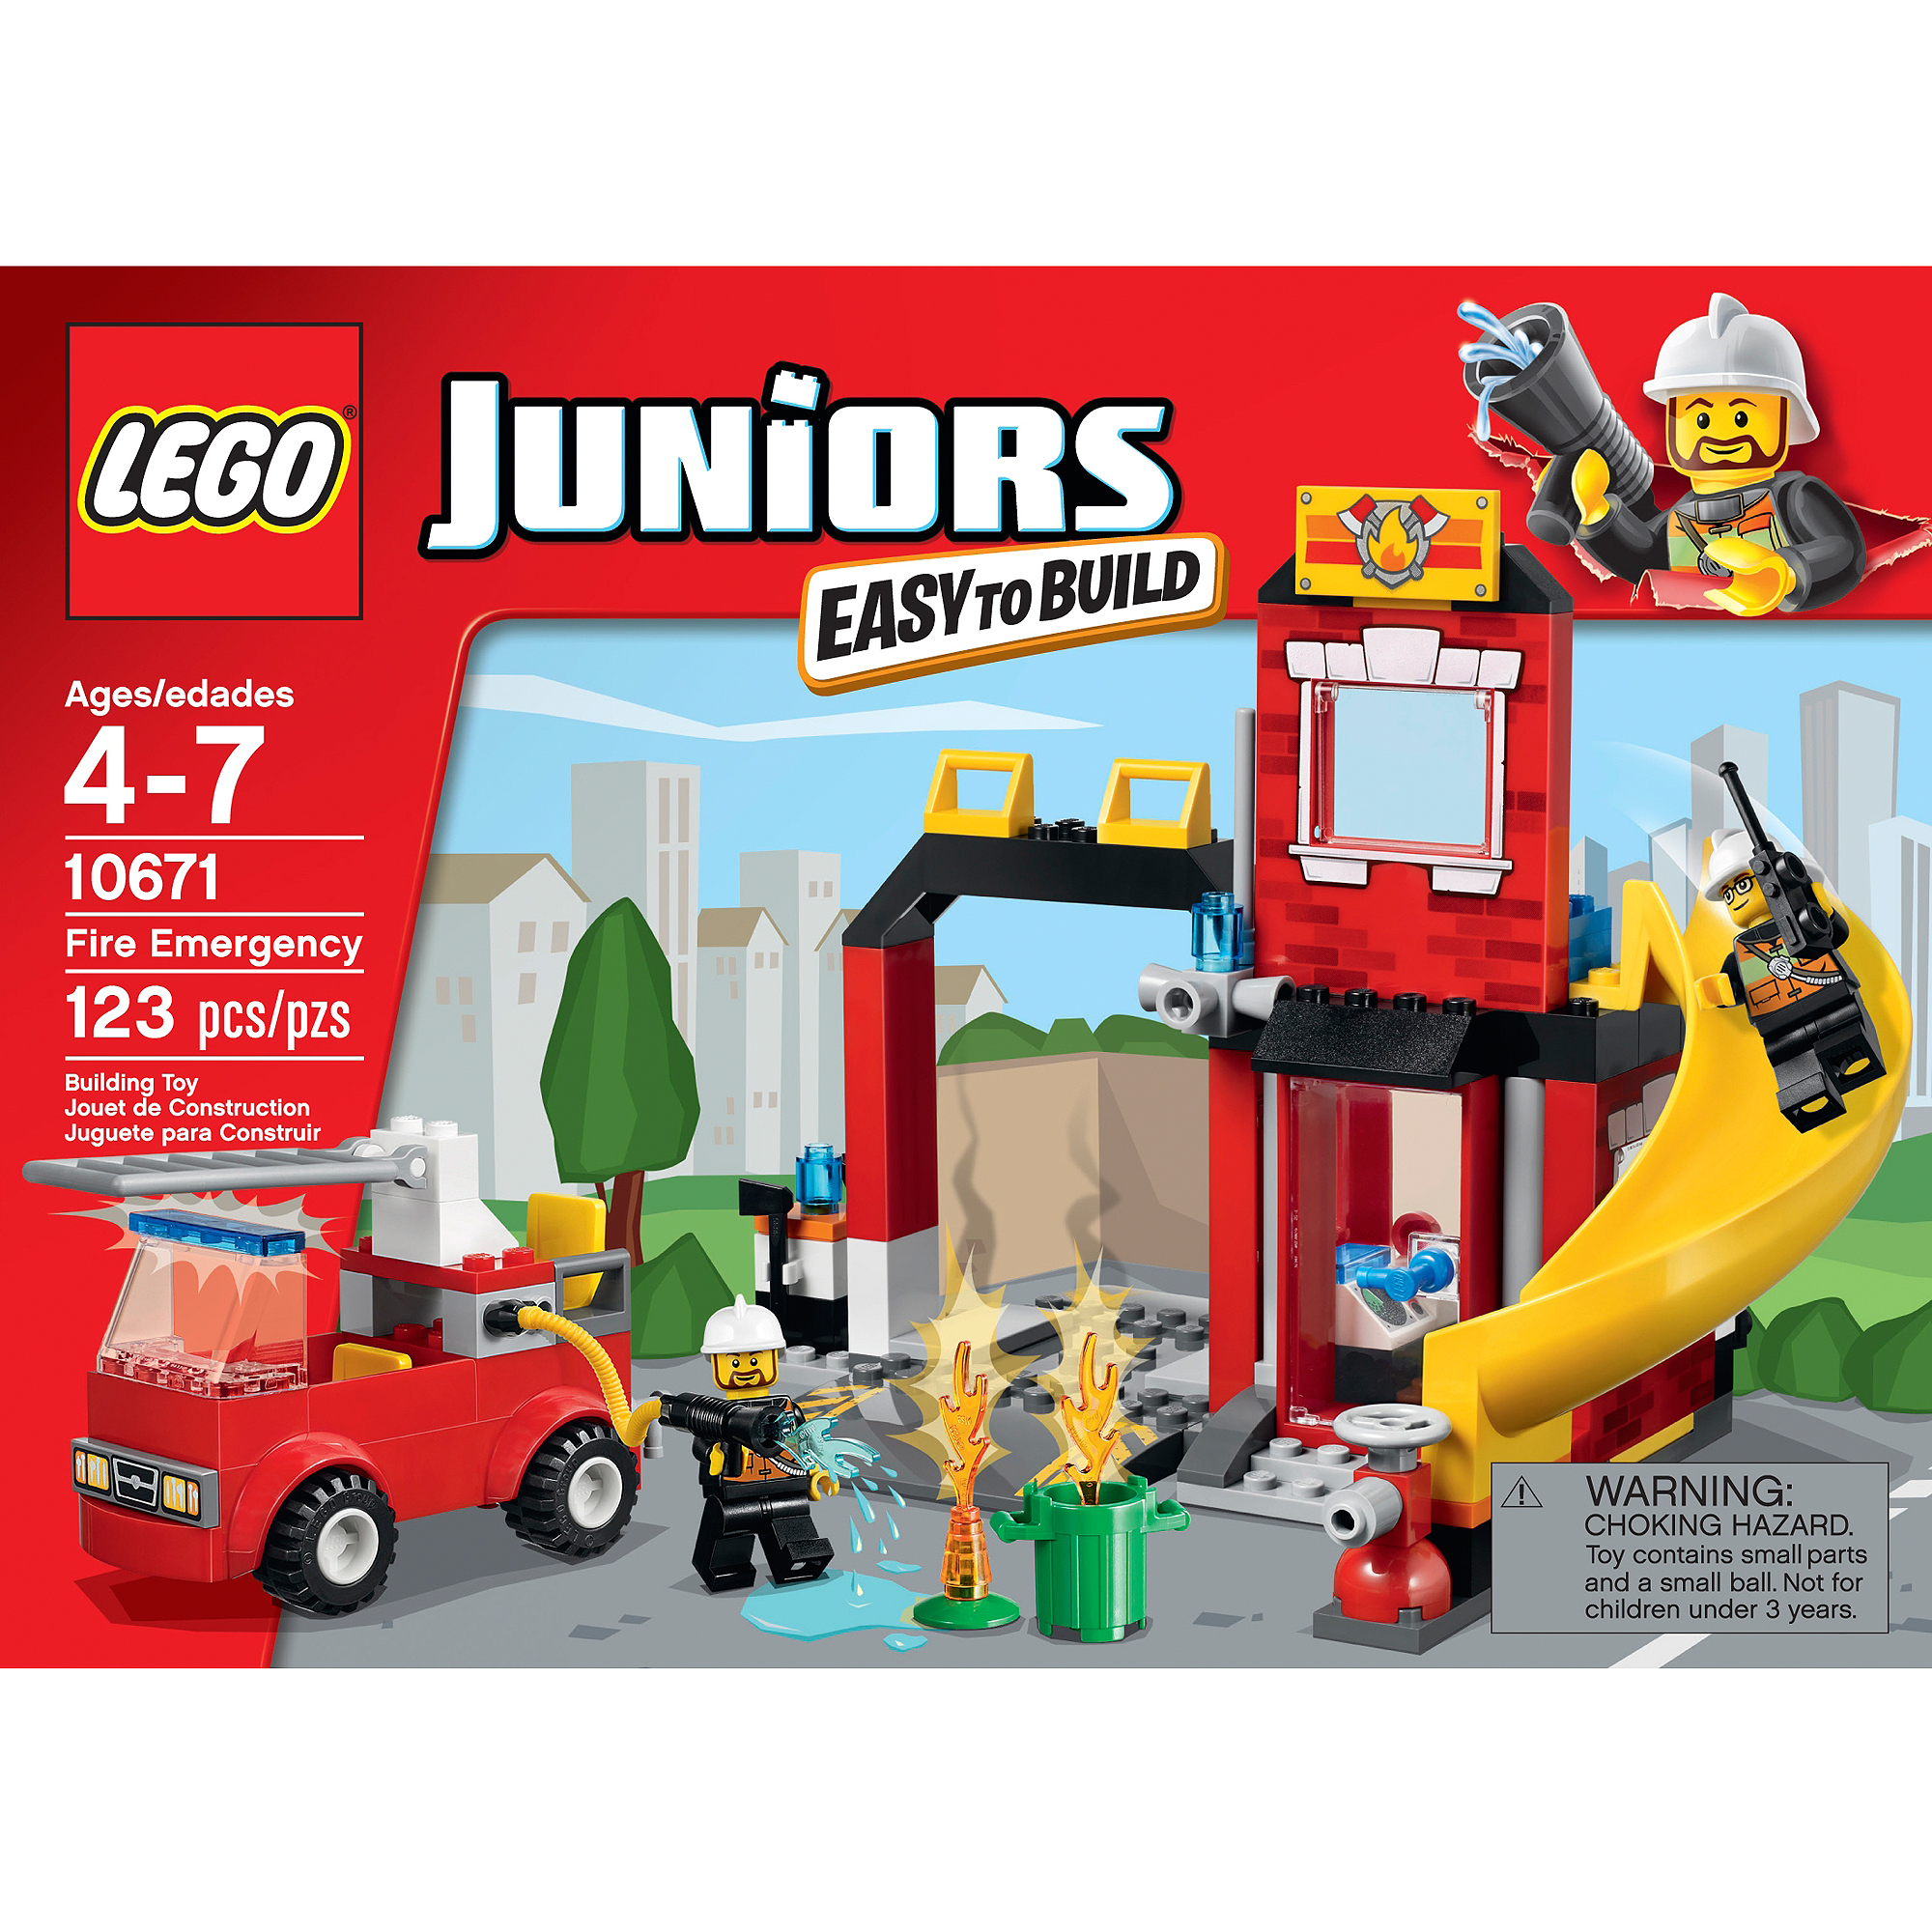 LEGO Juniors Fire Emergency - image 2 of 7